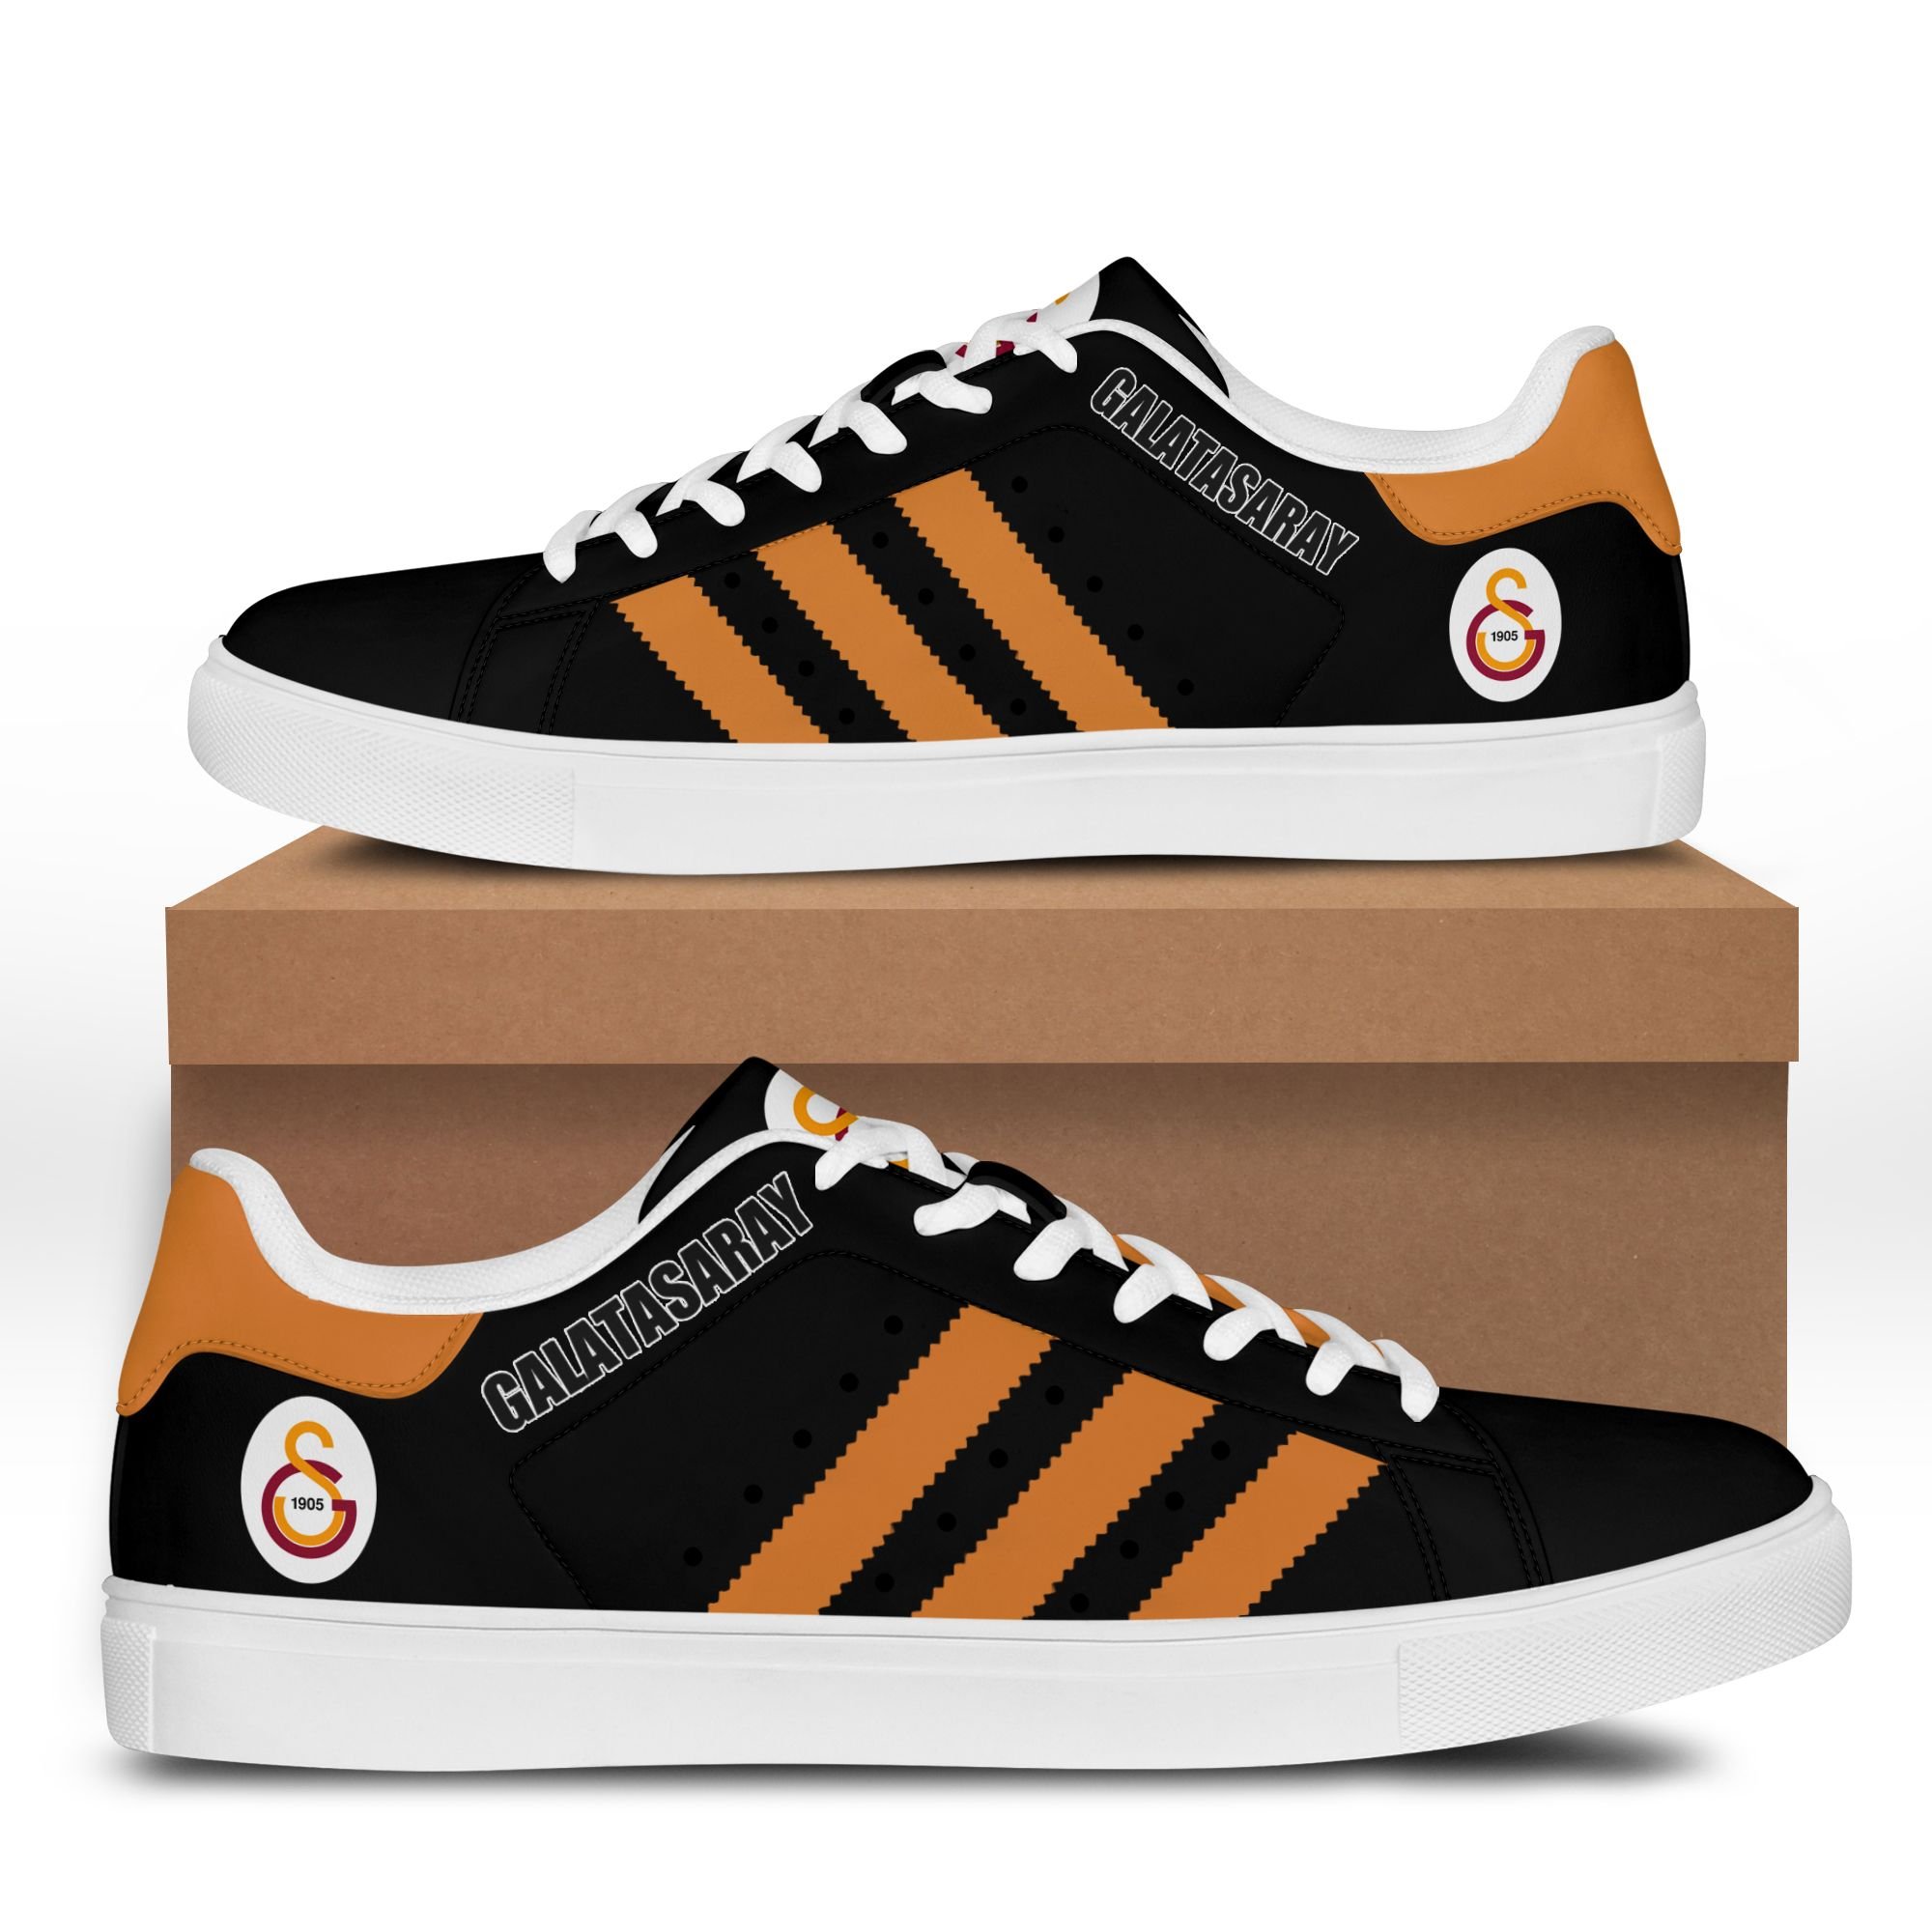 Galatasaray stan smith low top shoes 2.3